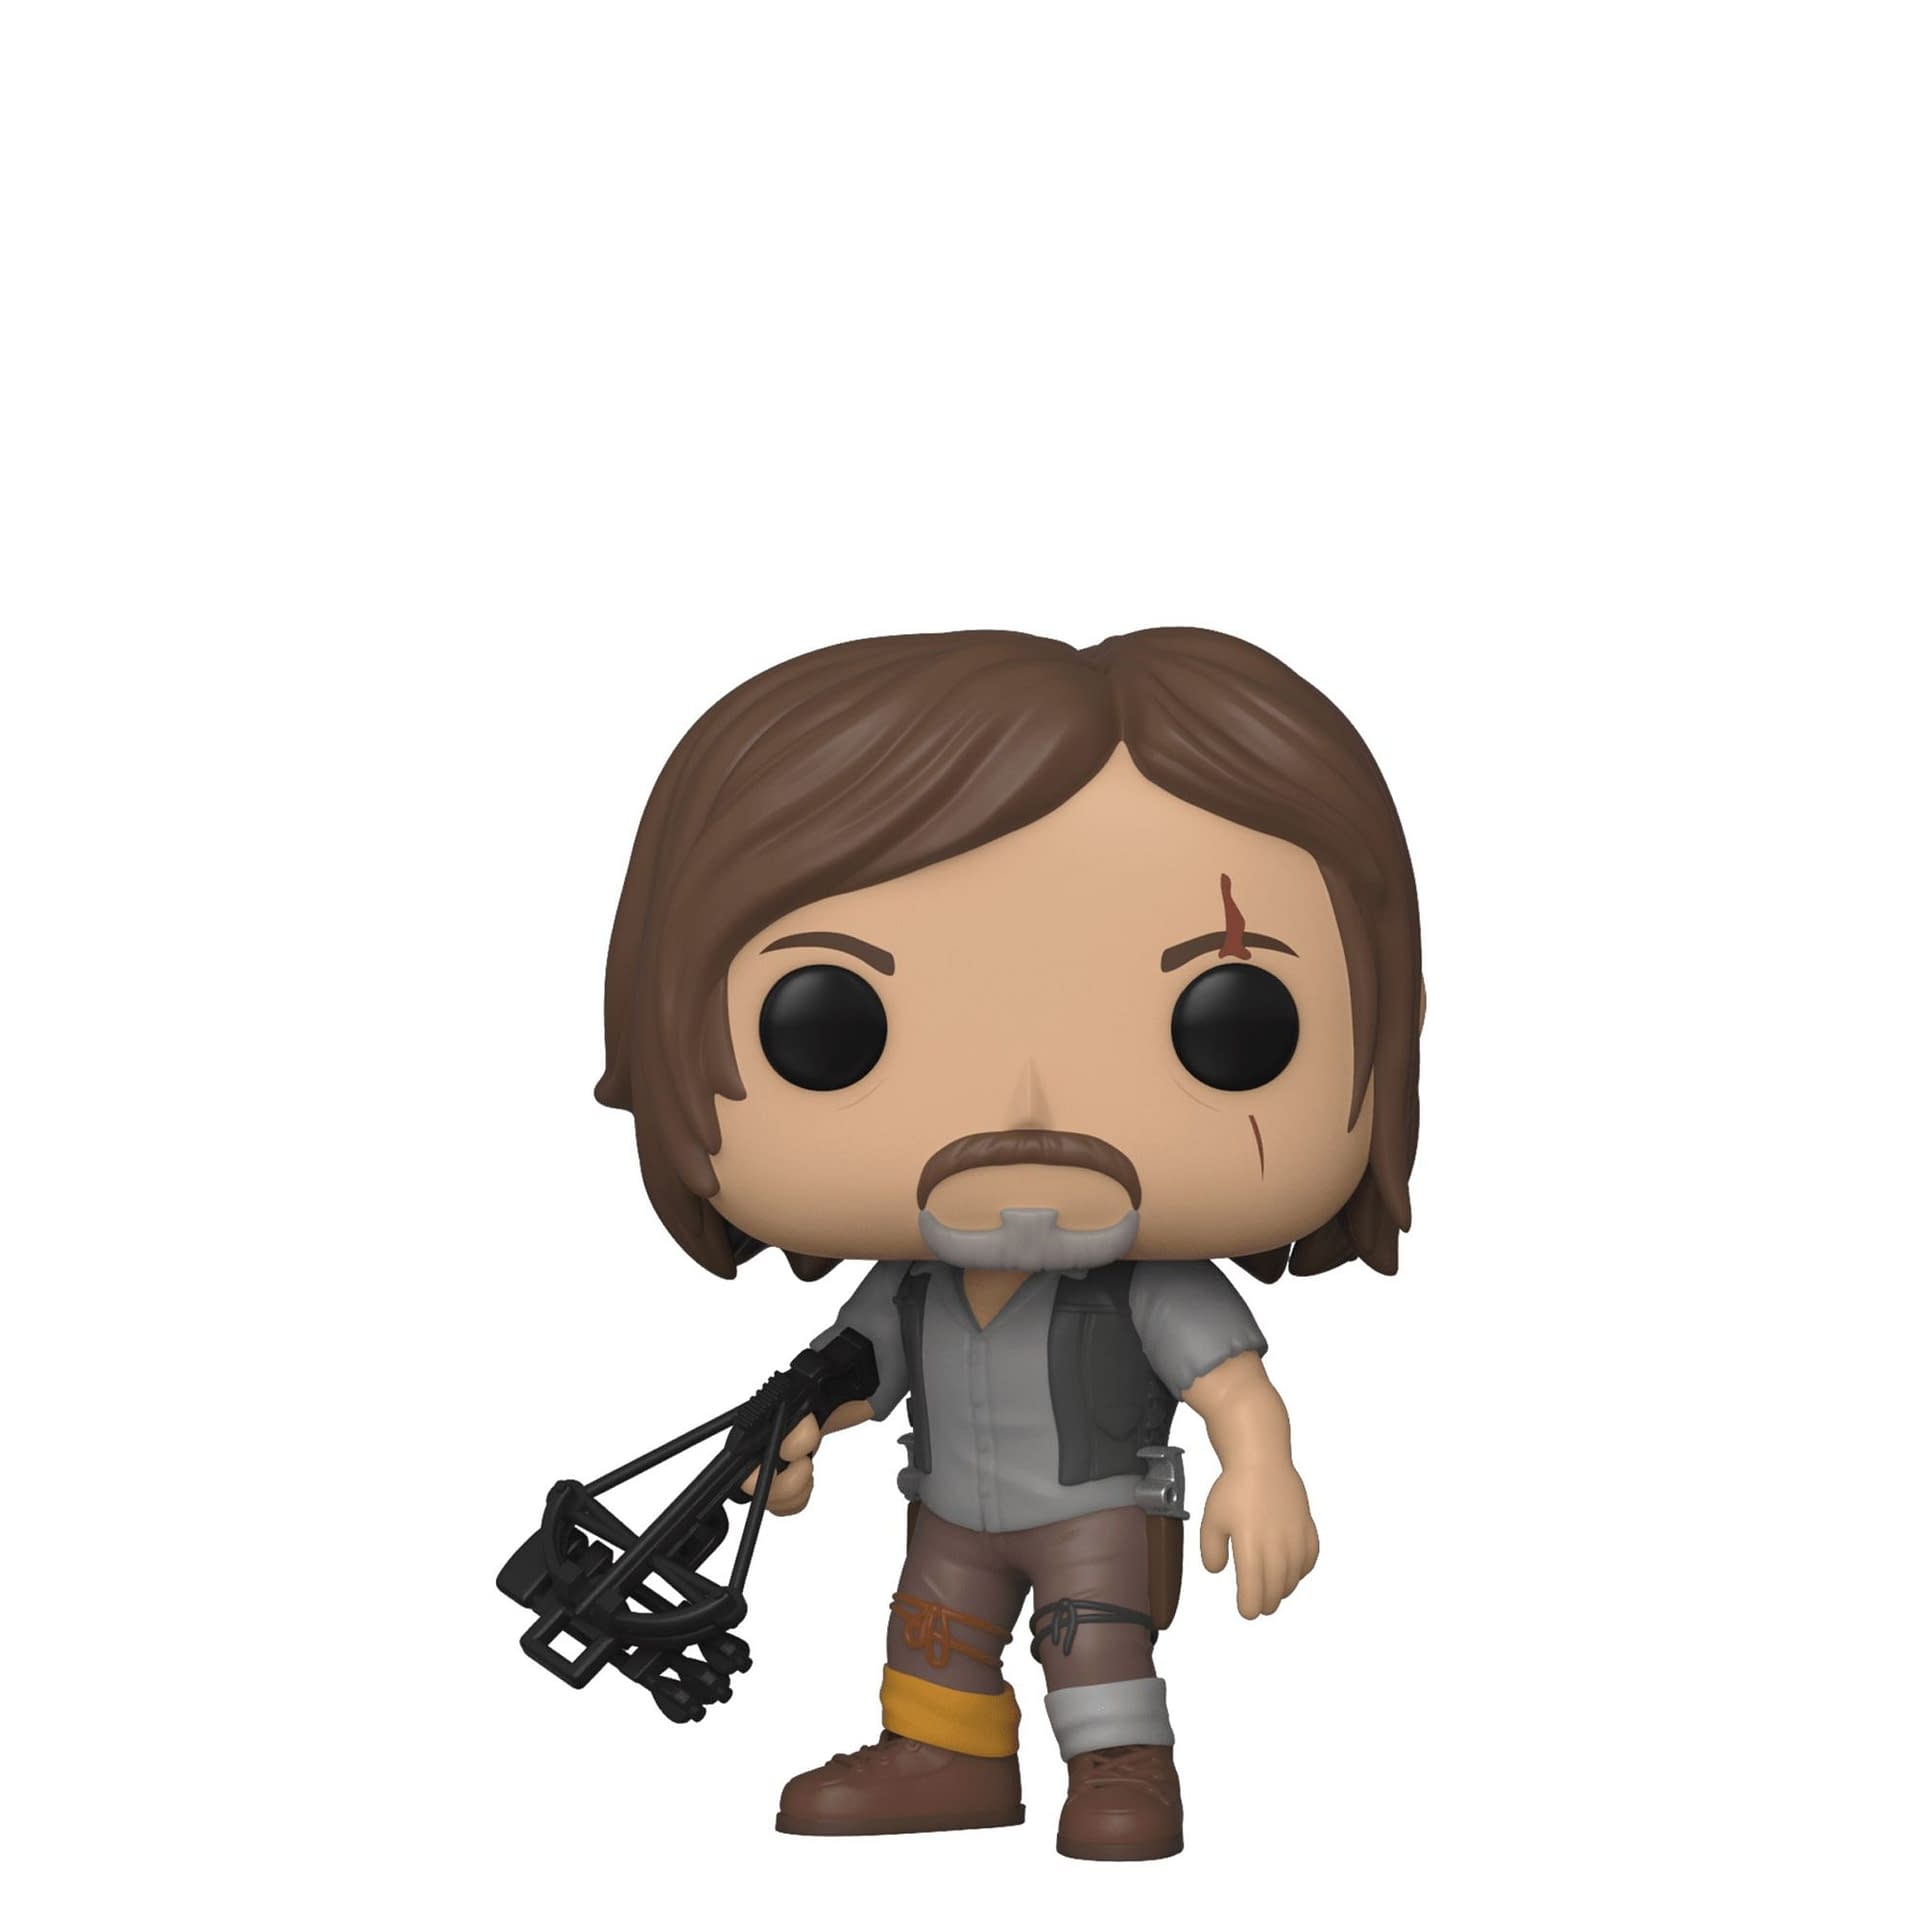 "The Walking Dead" Rises Again with New Wave of Funko Pops